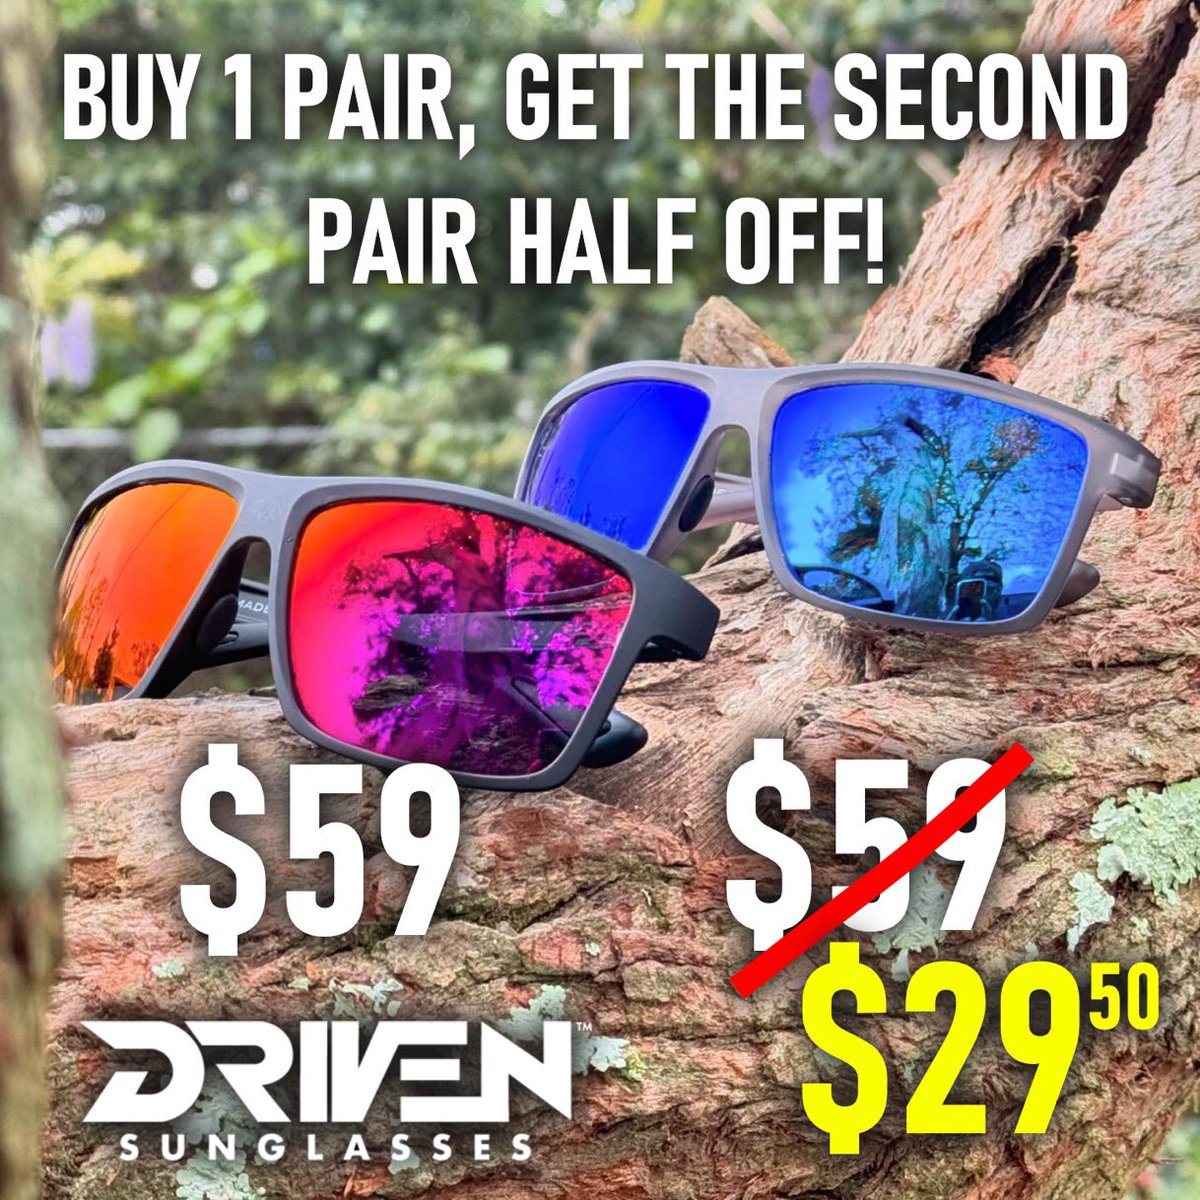 Sale is ending Soon! Don’t miss this chance to save on the hottest sunglasses in the Garage!